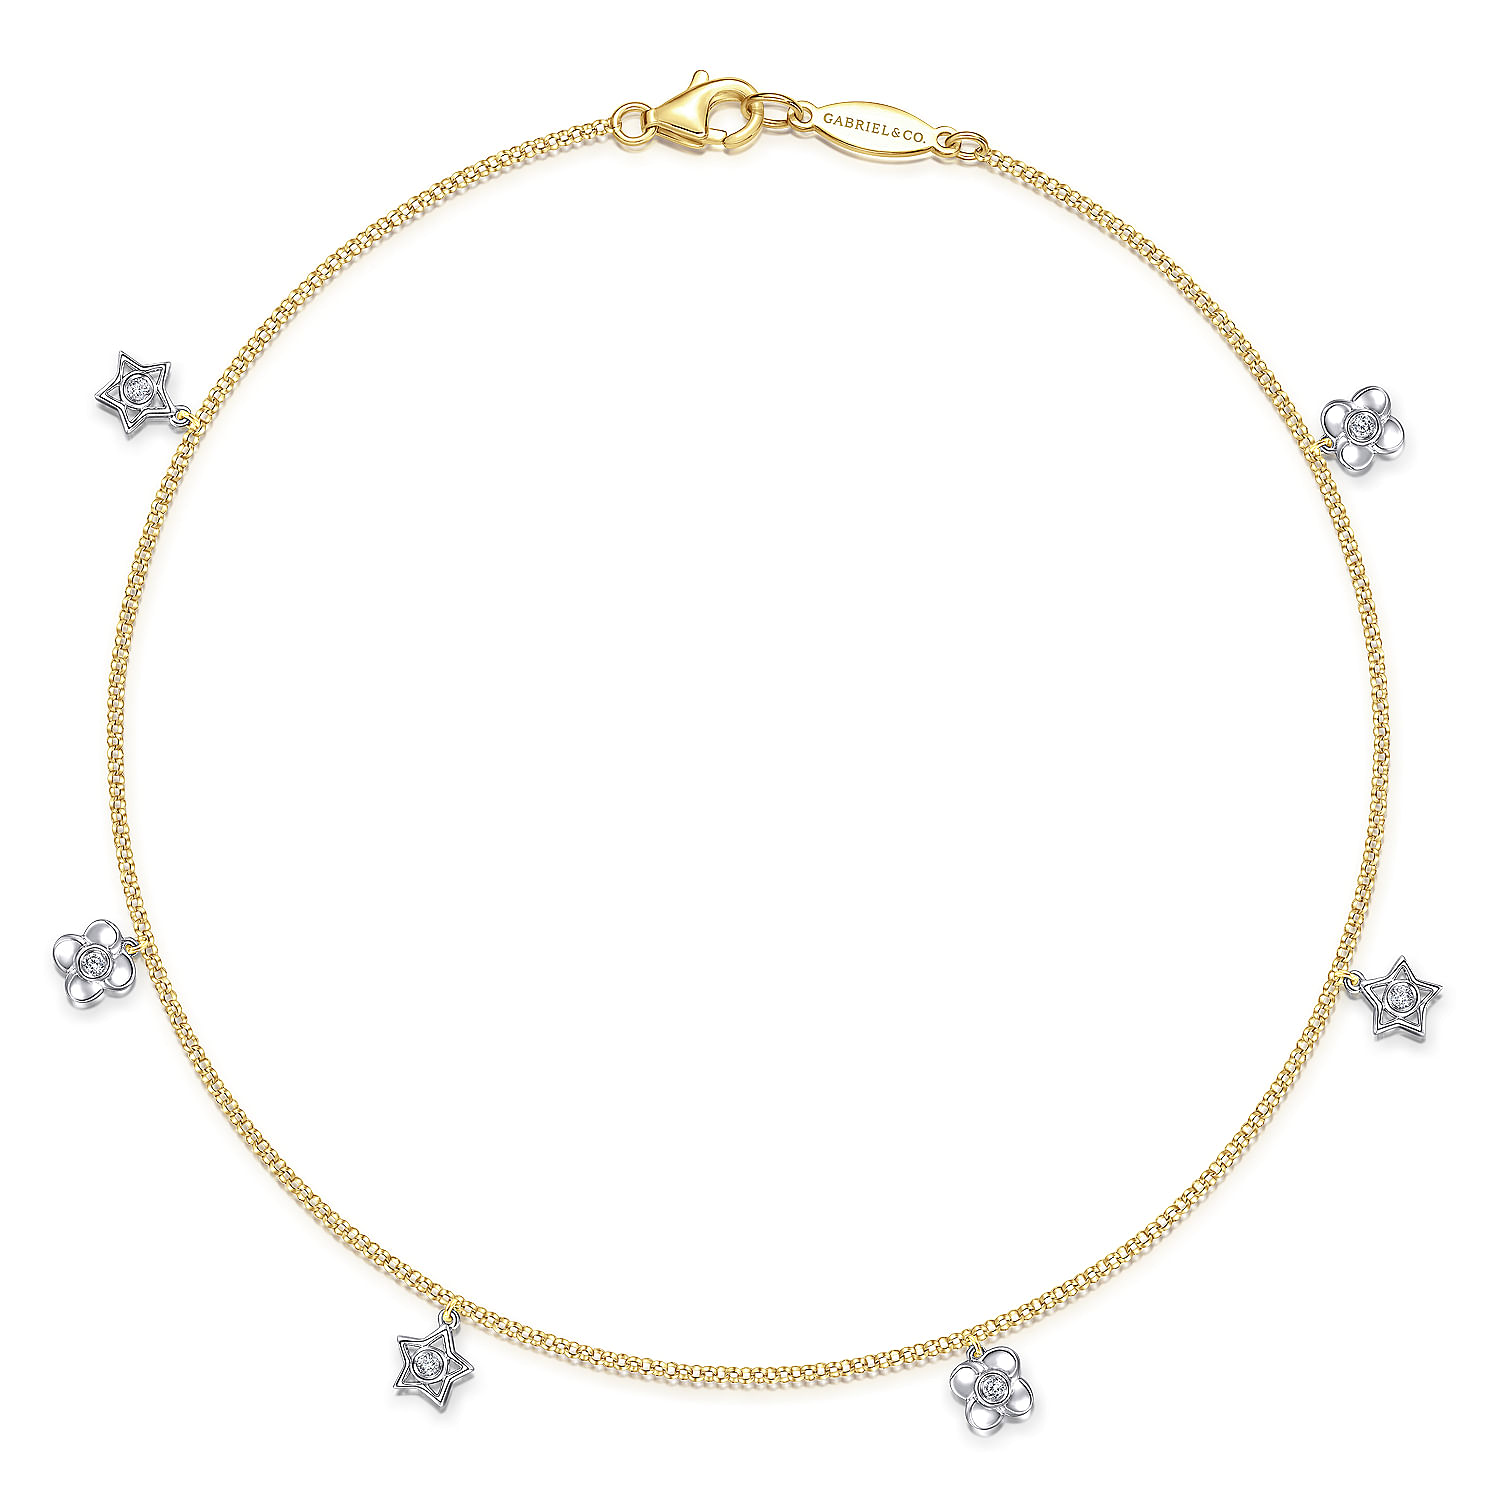 Gabriel - 14K Yellow Gold Chain Ankle Bracelet with White Gold Diamond Flower and Star Charms